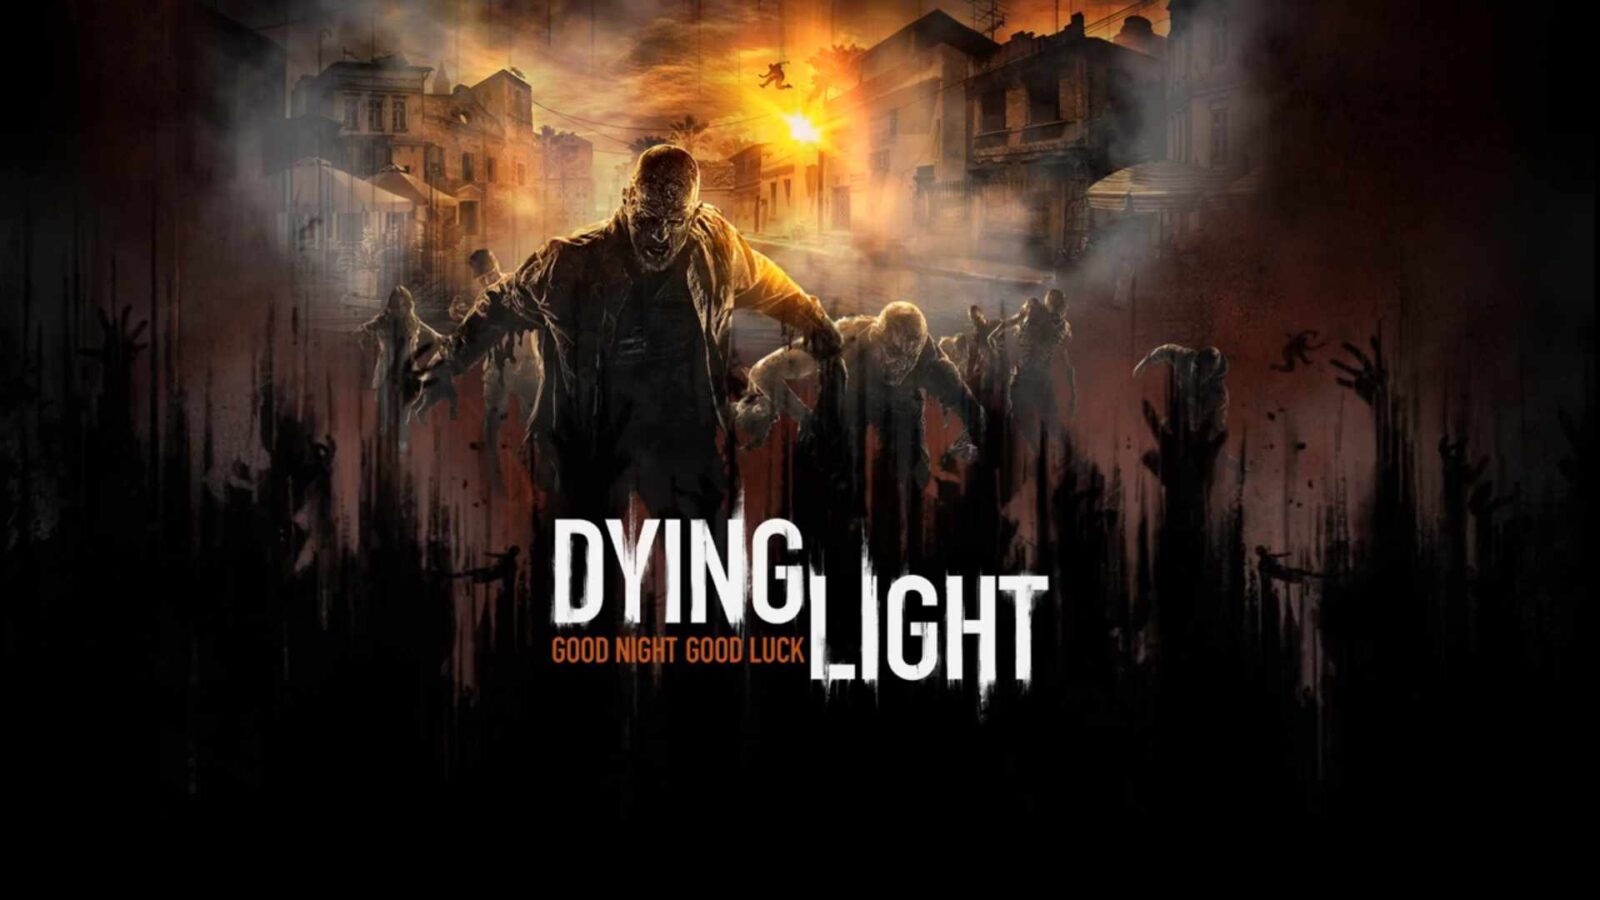 LiveWallpapers4Free.com | Dying Light Survival Horror Game - Free Live Wallpaper